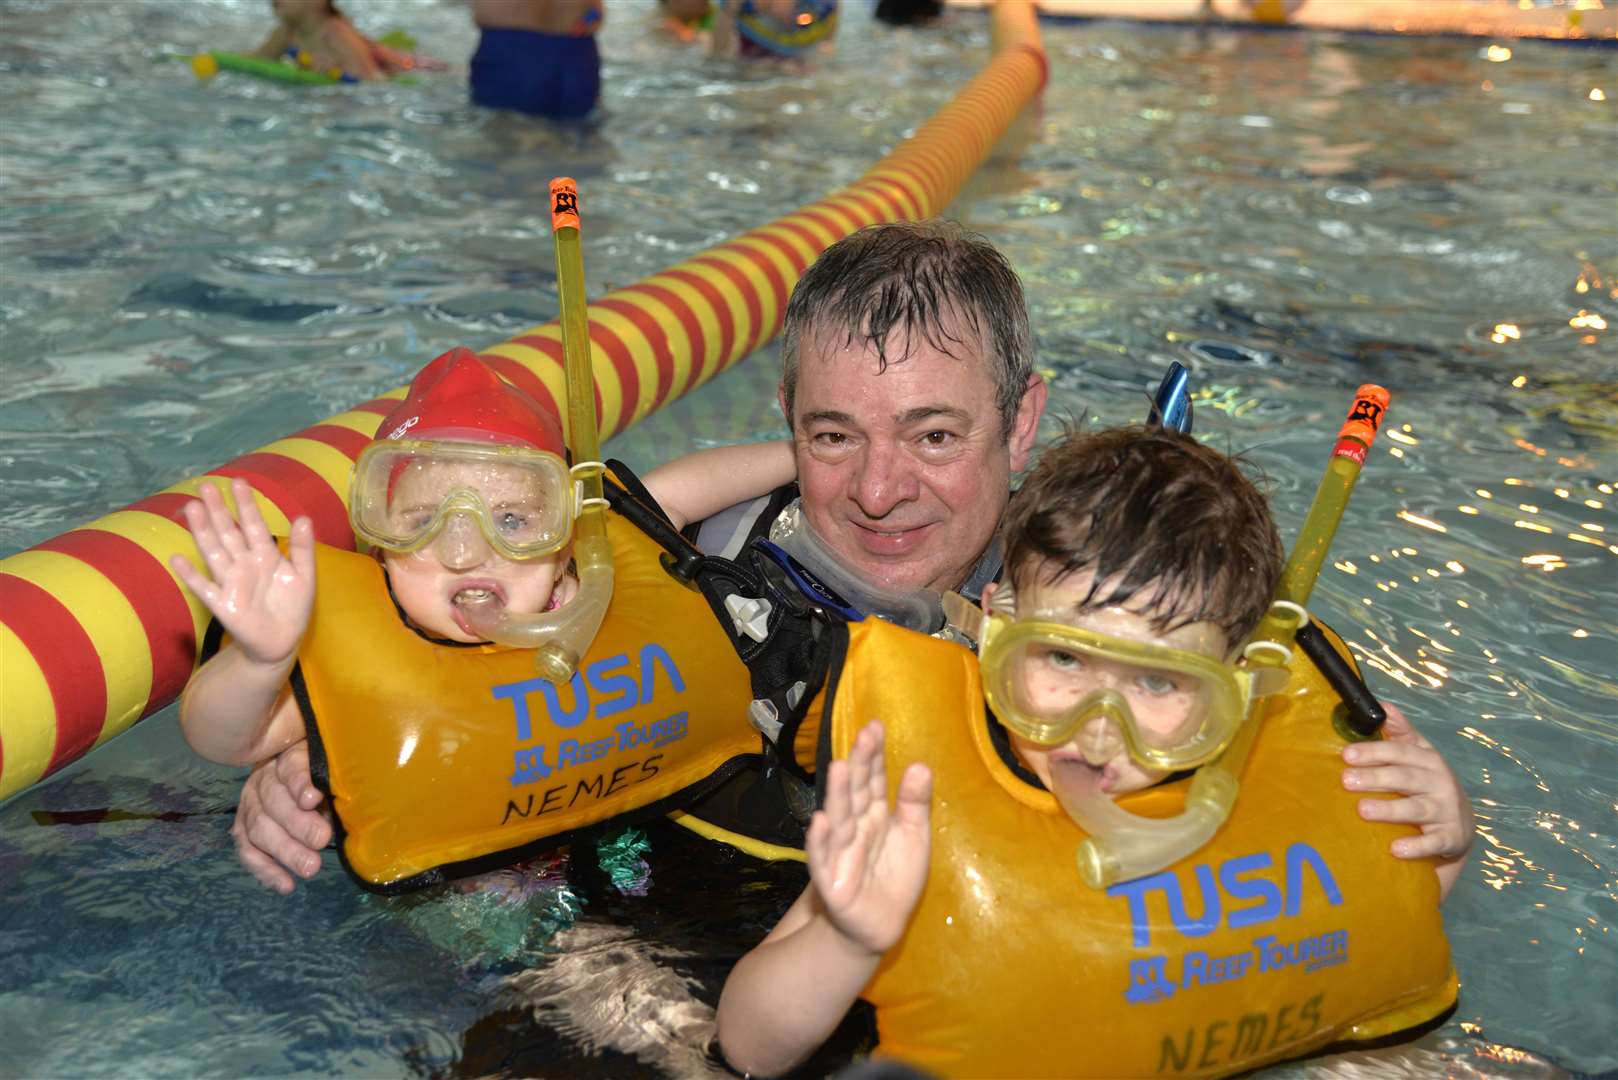 Alexis, 3, and Daniel FIrmin, 6, with granddad Paul Firmin at a Medway Big Splash event